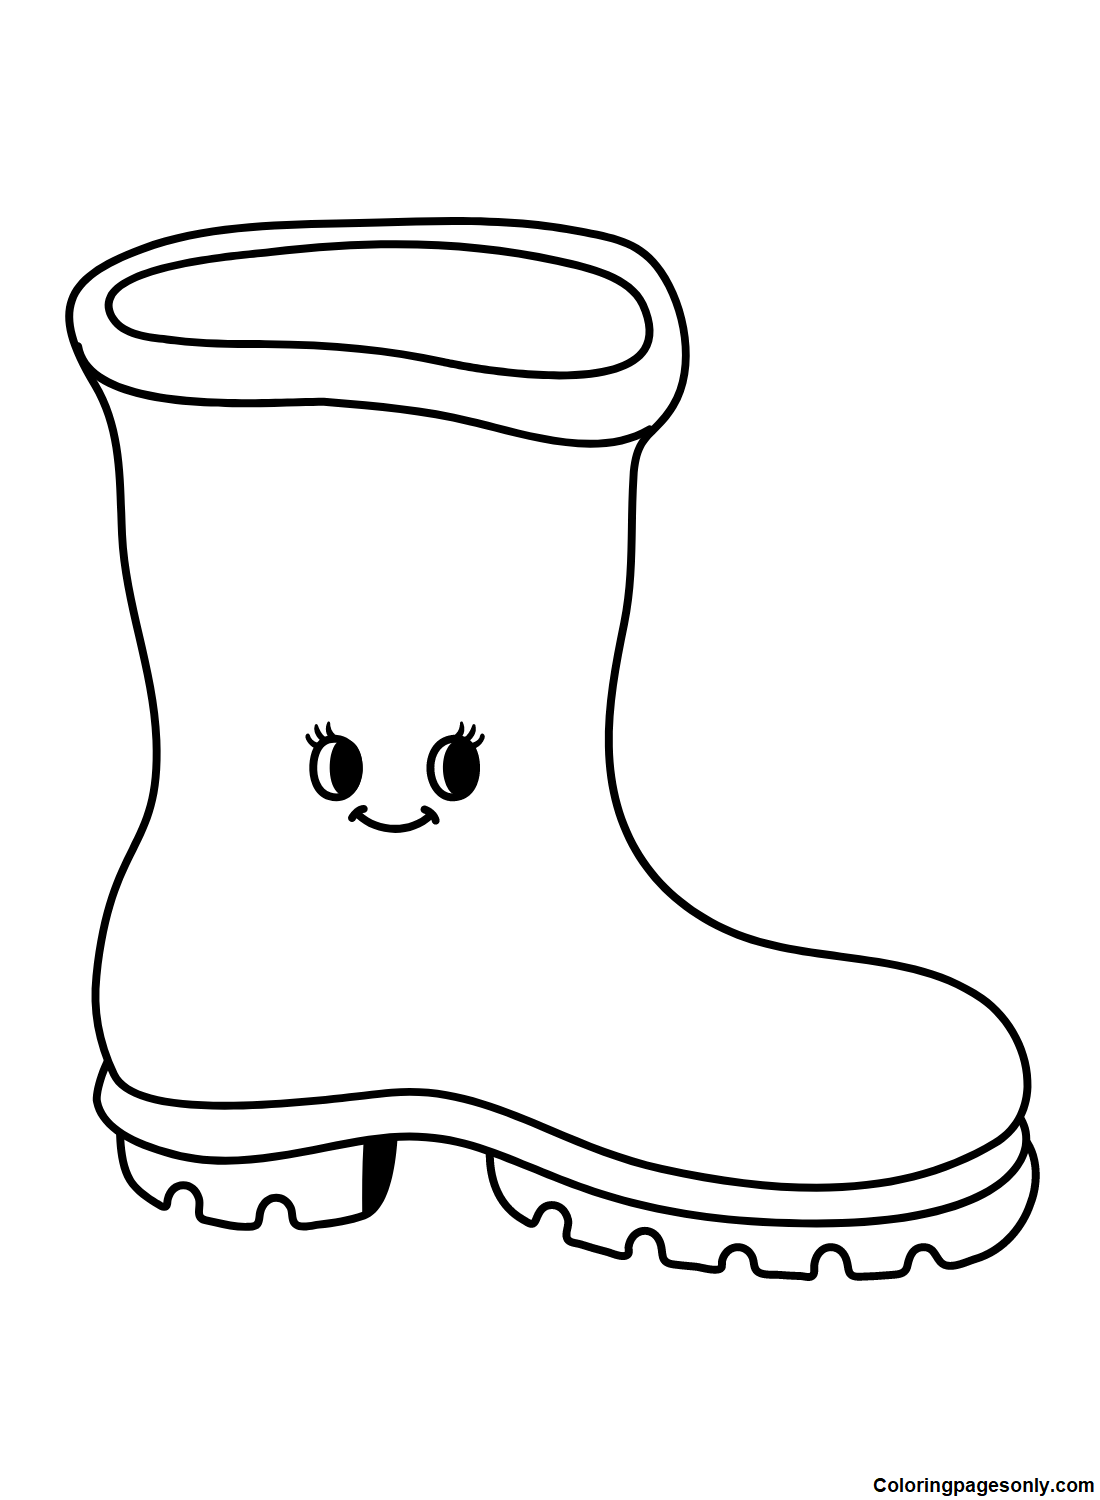 Gardening Boots Cartoon Coloring Page